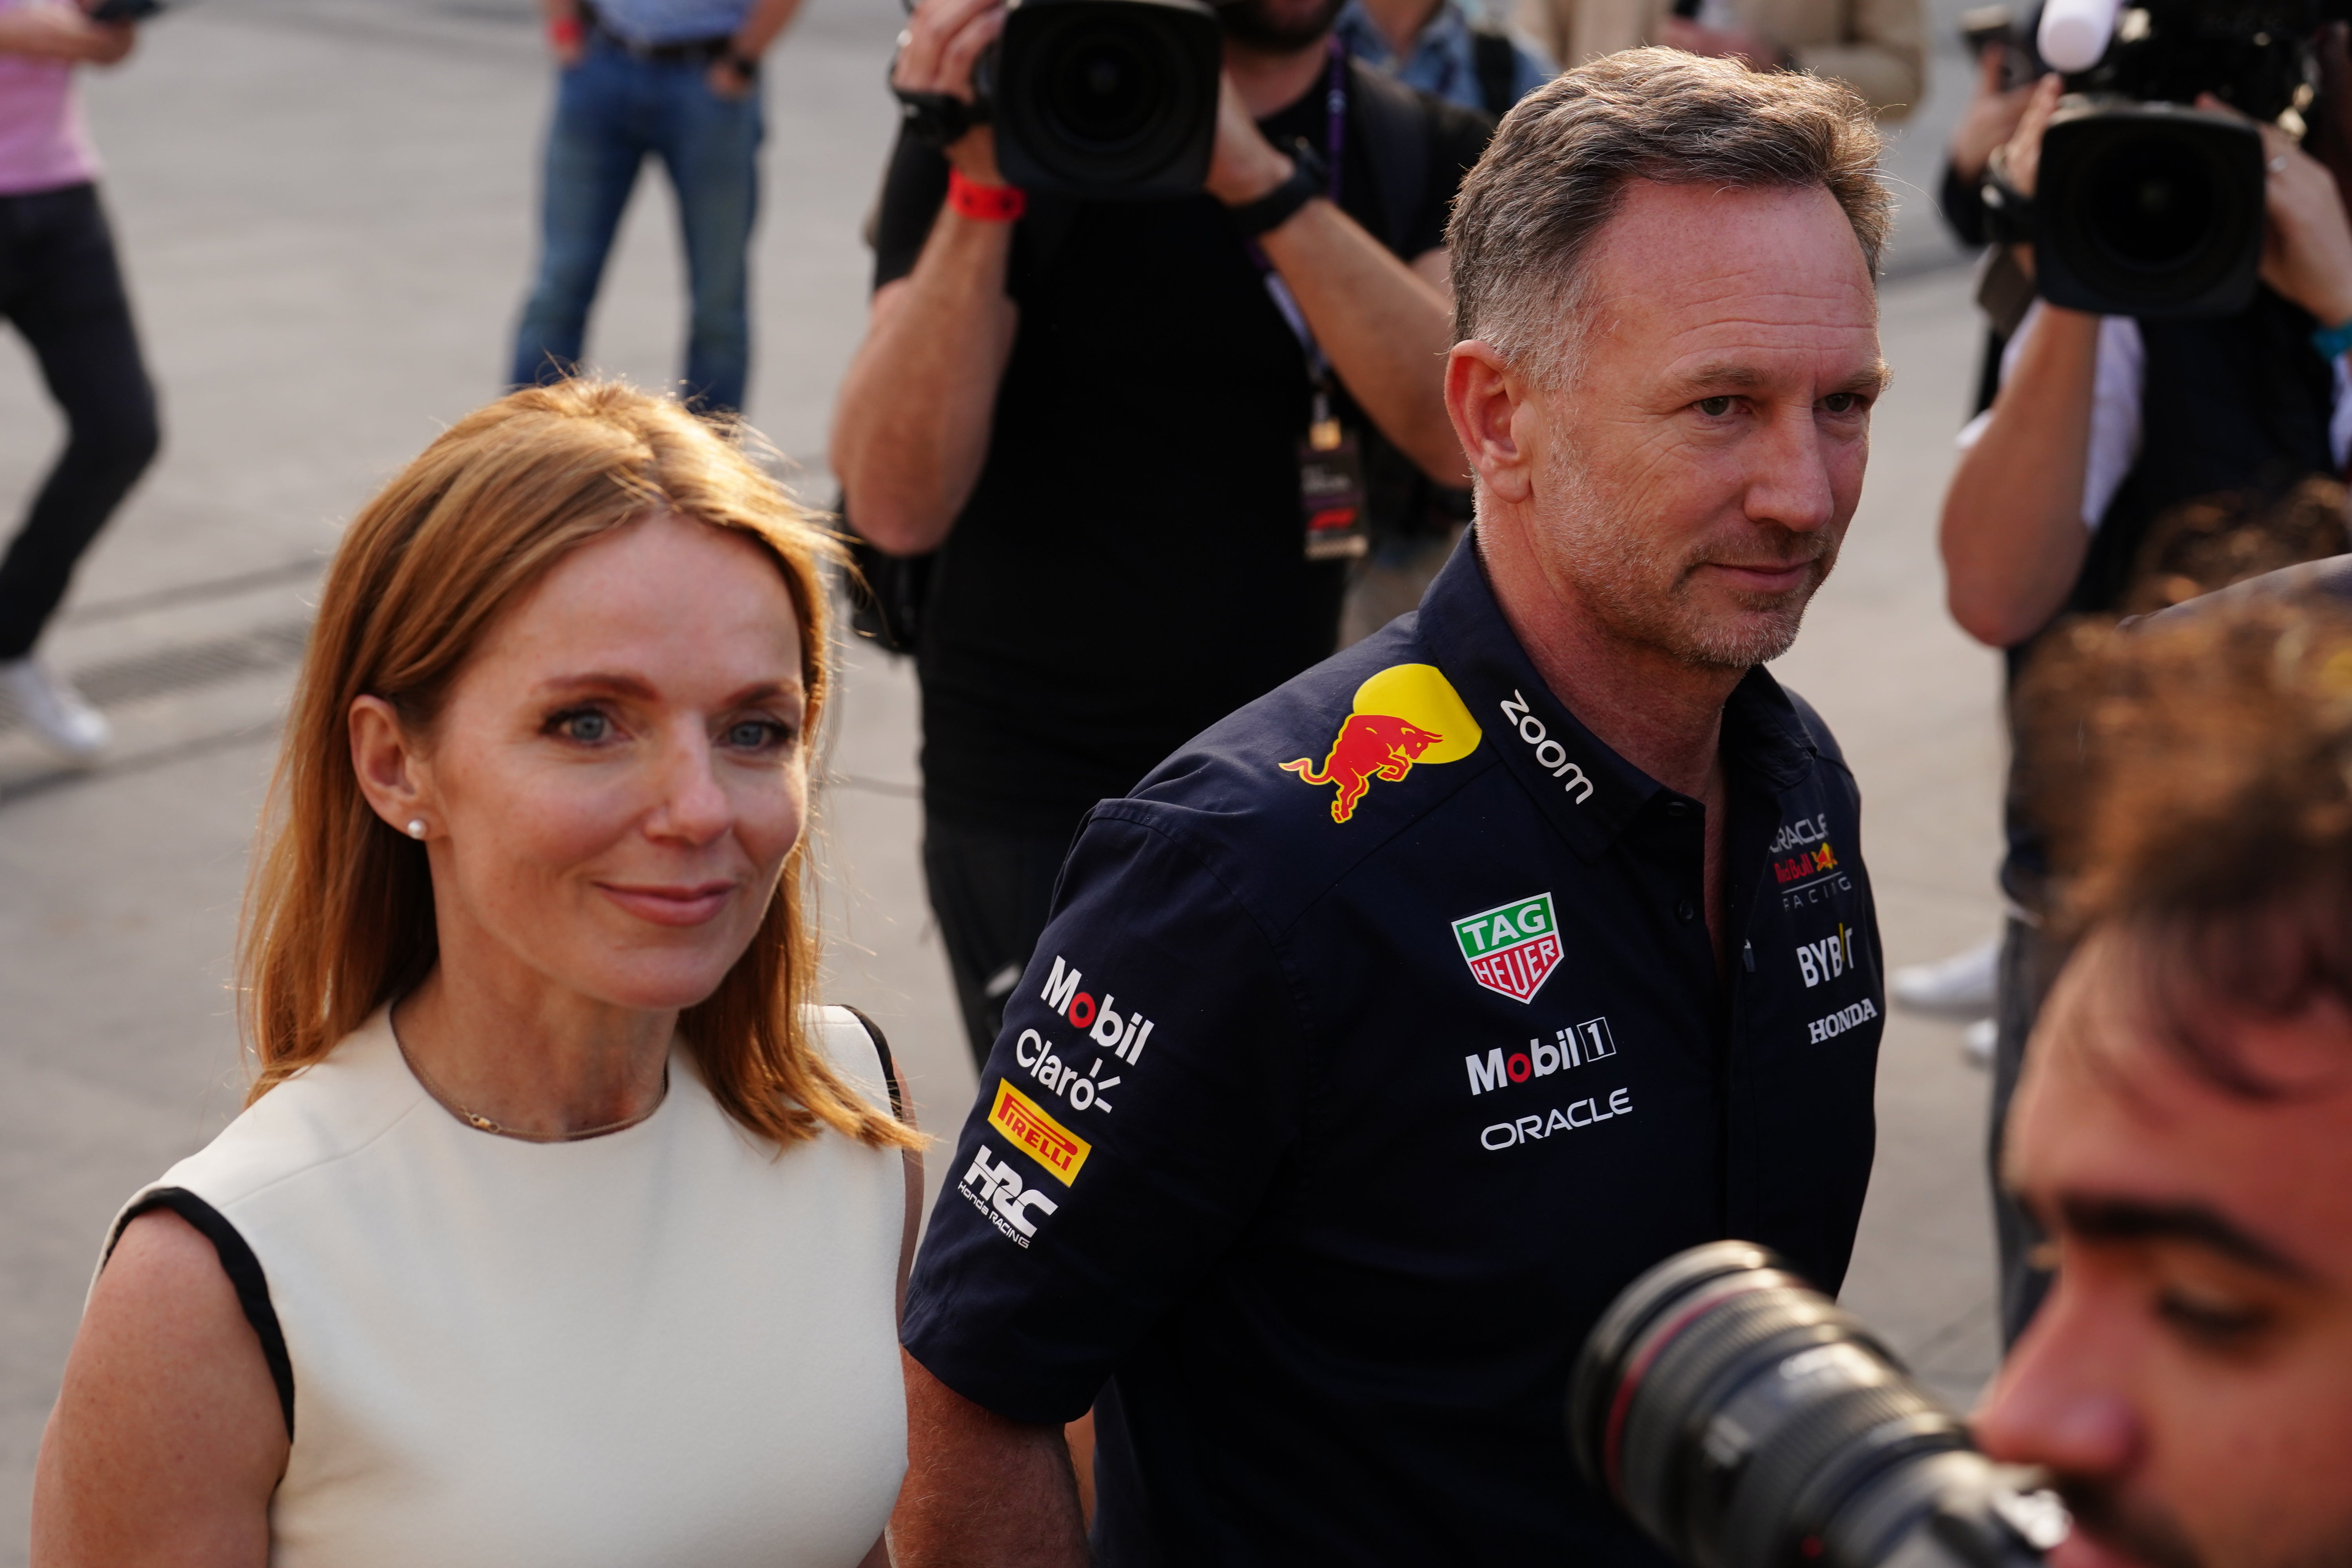 The former Spice Girls singer has joined her husband at the F1 event